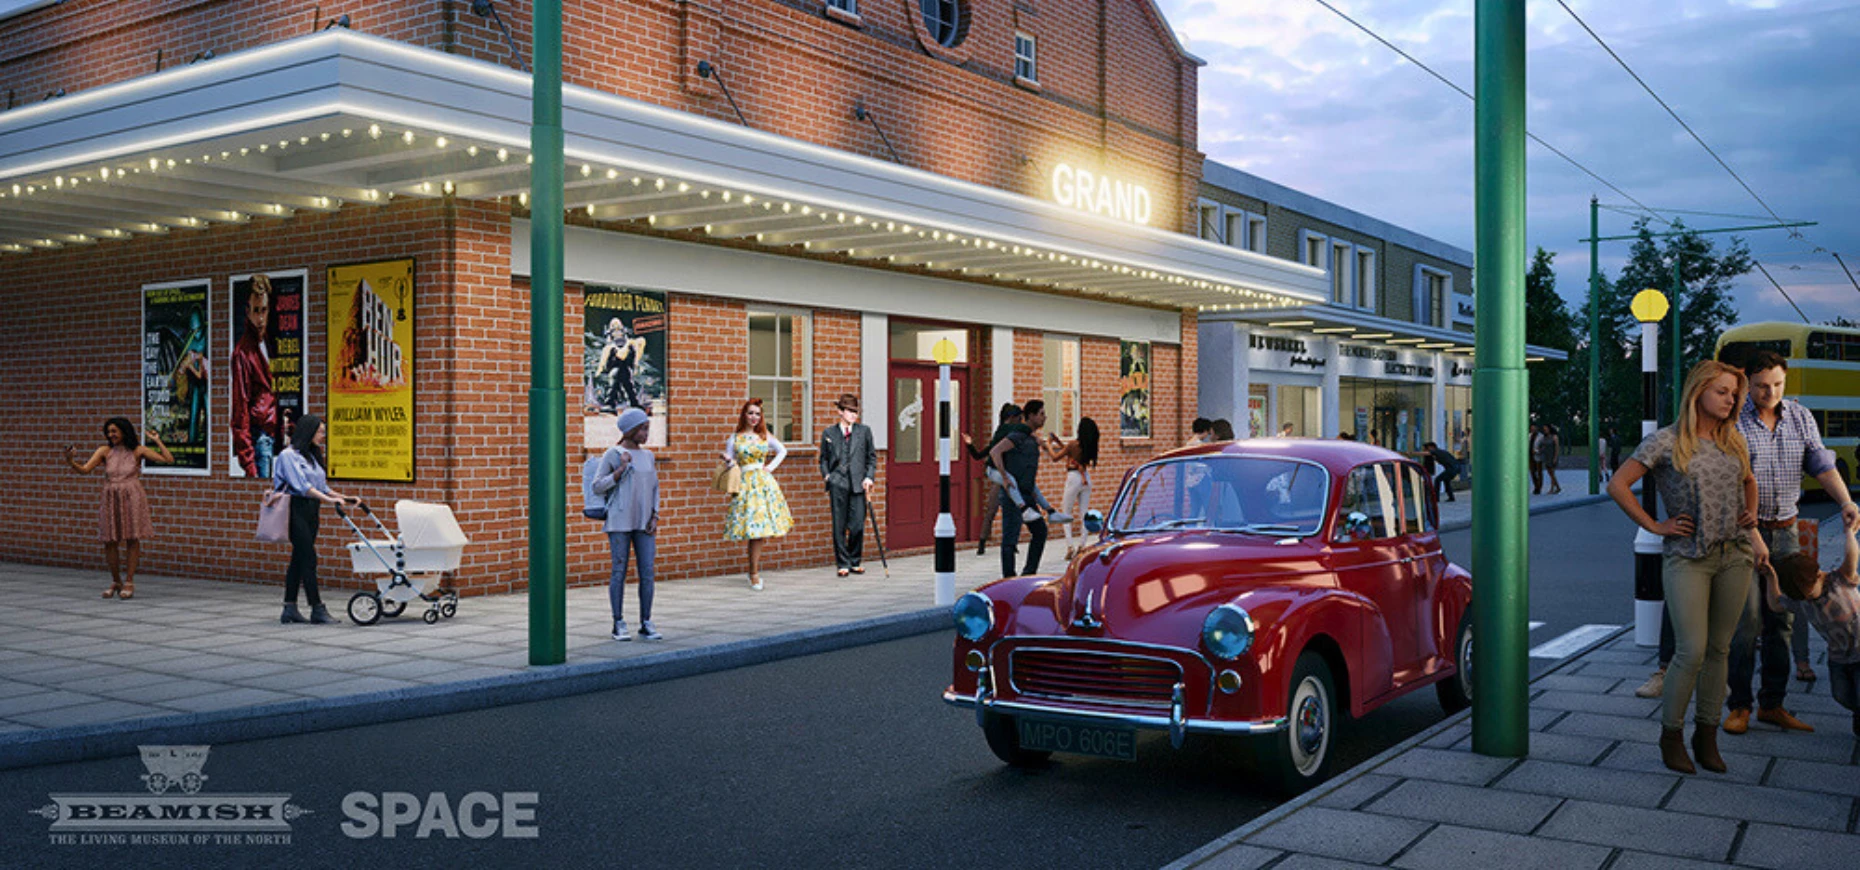 Recreation of Beamish's 1950s cinema set to open in 2024